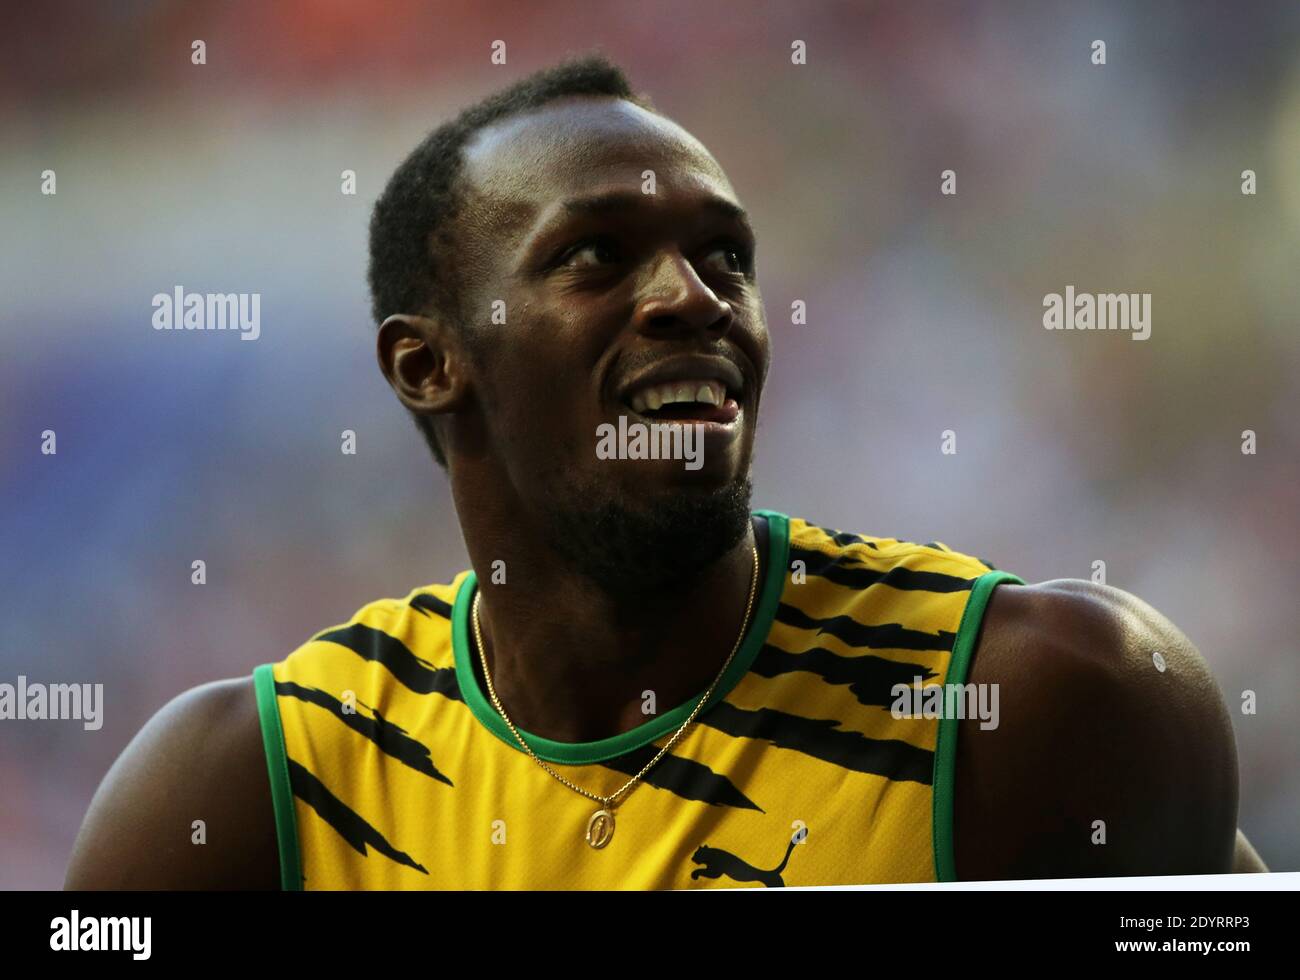 Usain Bolt of Jamaica celebrates after winning the men's 200m final at the 14th IAAF World Championships in Athletics at Luzhniki Stadium in Moscow, Russia, 17 August 2013. Photo by Giuliano Bevilacqua/ABACAPRESS.COM Stock Photo